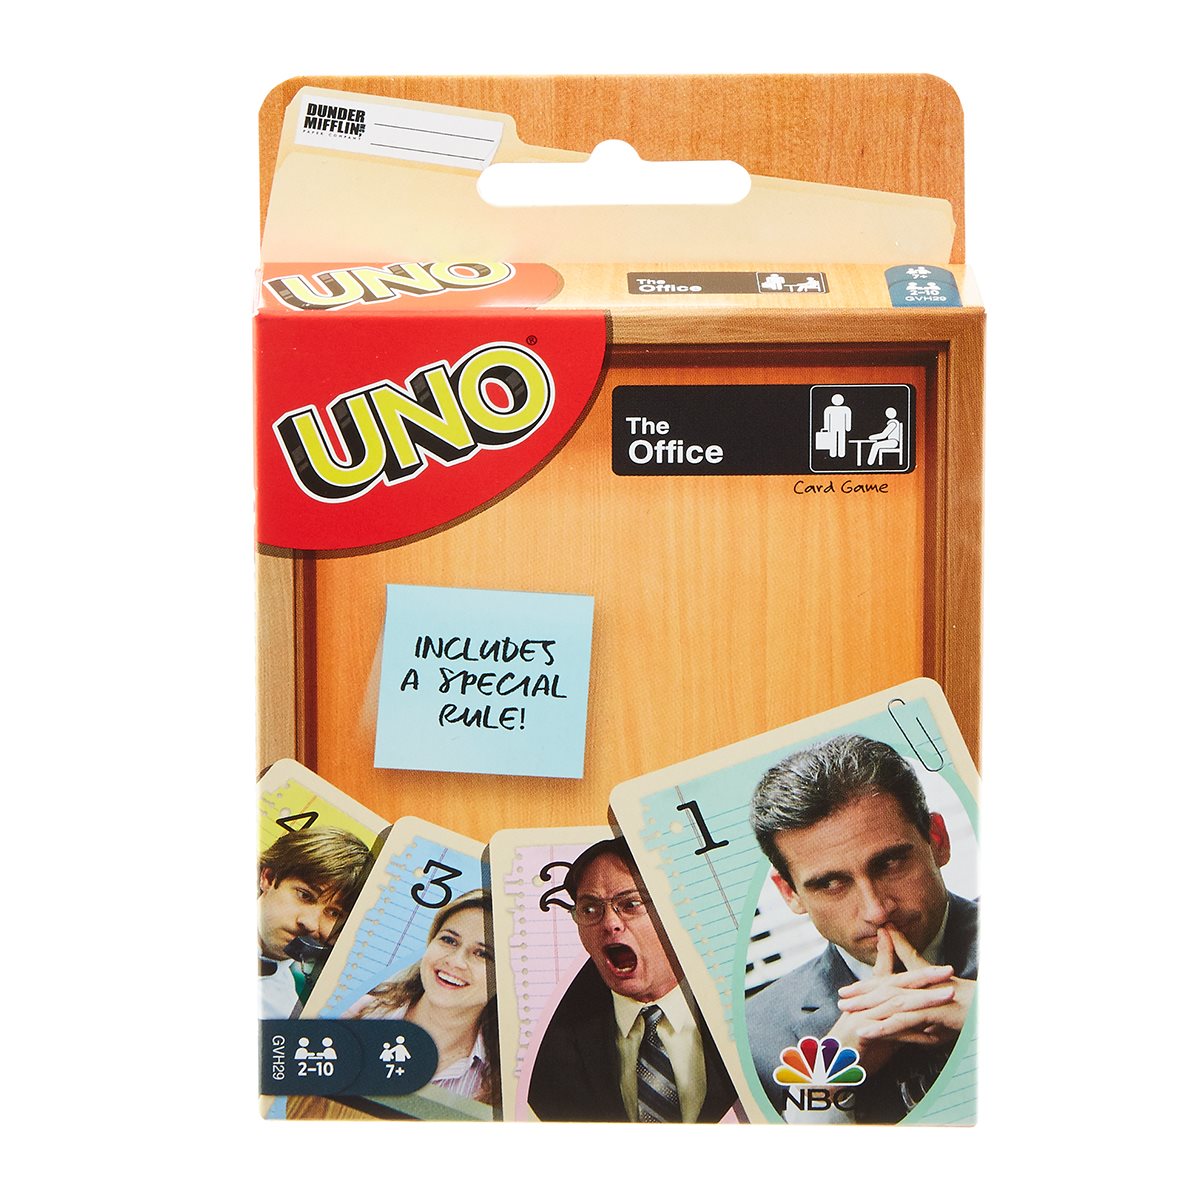 The Office - UNO Card Game